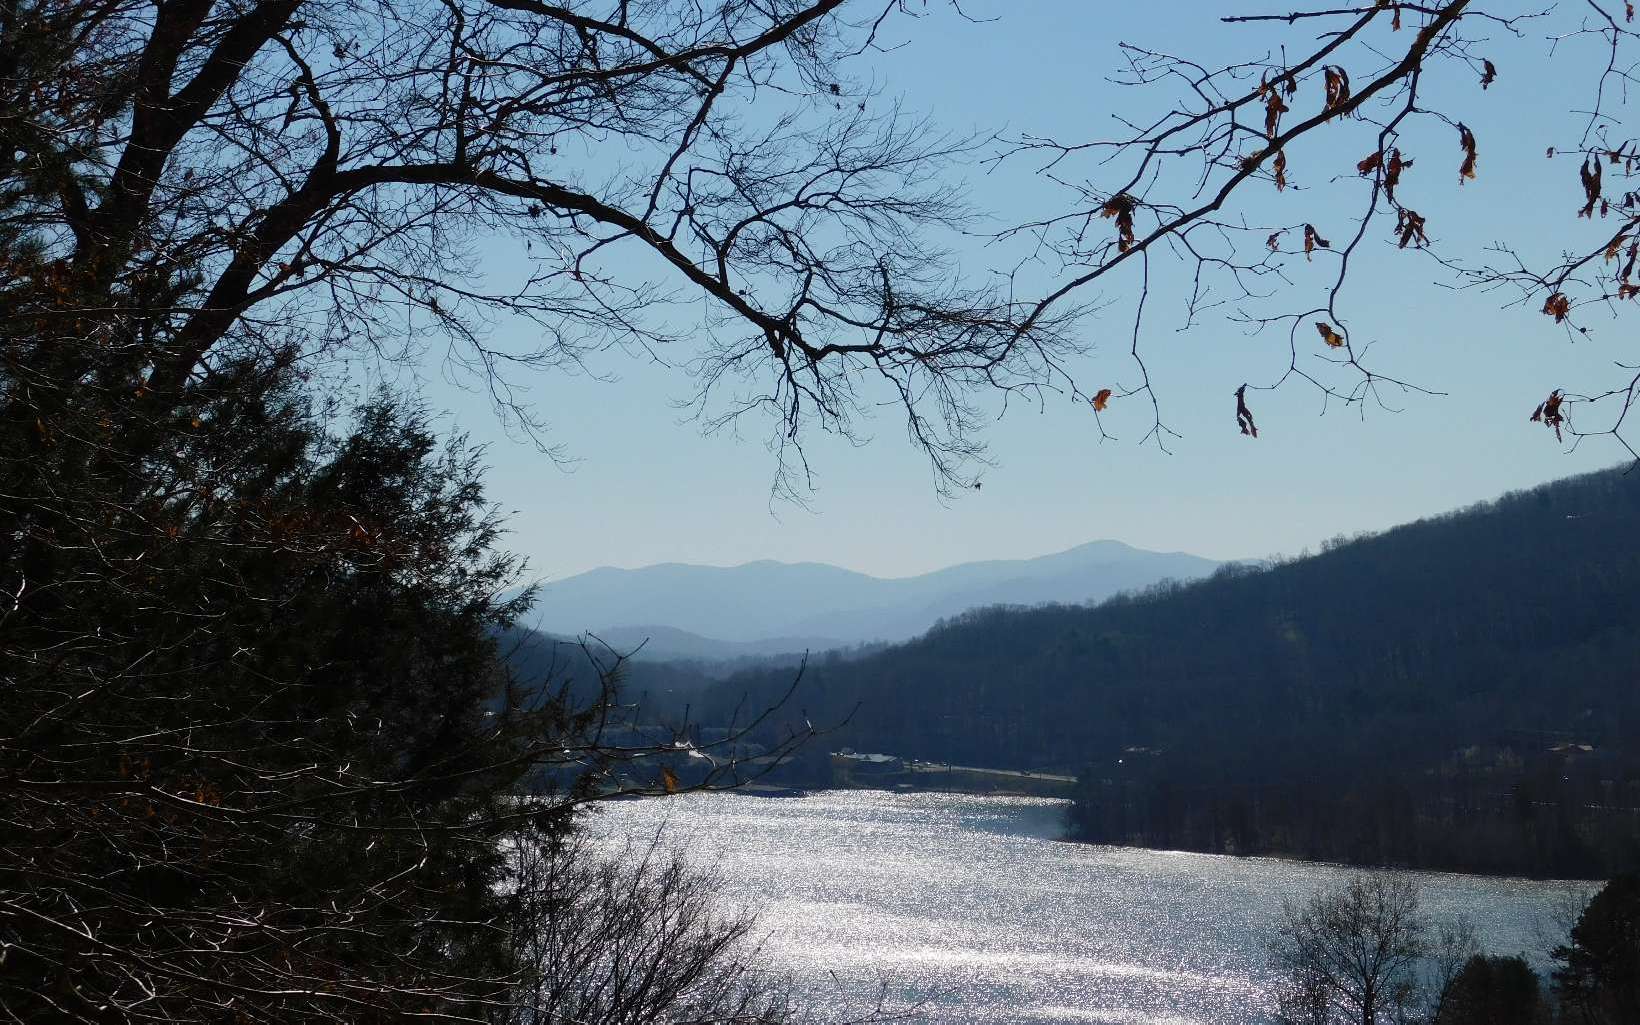 VERY PRIVATE 2.25 ACRES IN THE BEAUTIFUL NORTH GEORGIA MOUNTAINS WITH LAKE VIEWS!! Gentle lot, in very private Breezewood Village Community of Young Harris but still 5 miles out of Hiawassee and over looks the beautiful Lake Chatuge. Community features a great swimming and picnic area with fire pit for the whole family to enjoy